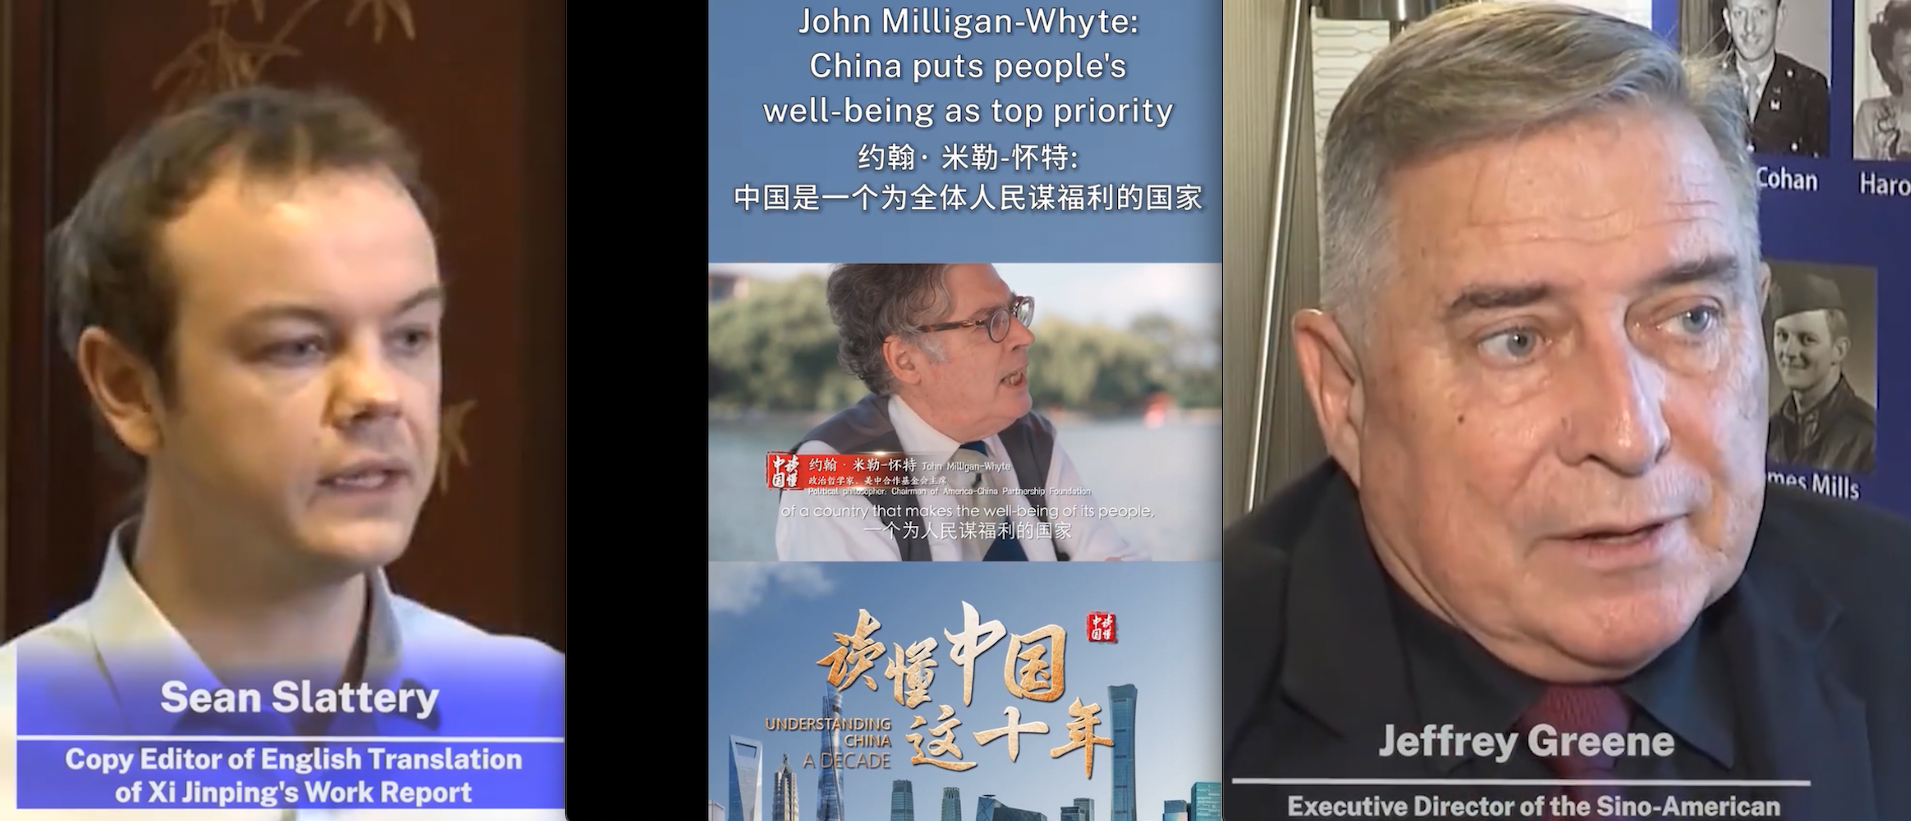 Sean Slattery, John Milligan-Whyte, and Jeffrey Greene praised China in interviews with CCTV News in the run-up to the Chinese Communist Party’s 20th Party Congress. [Screenshot/CCTVNews]